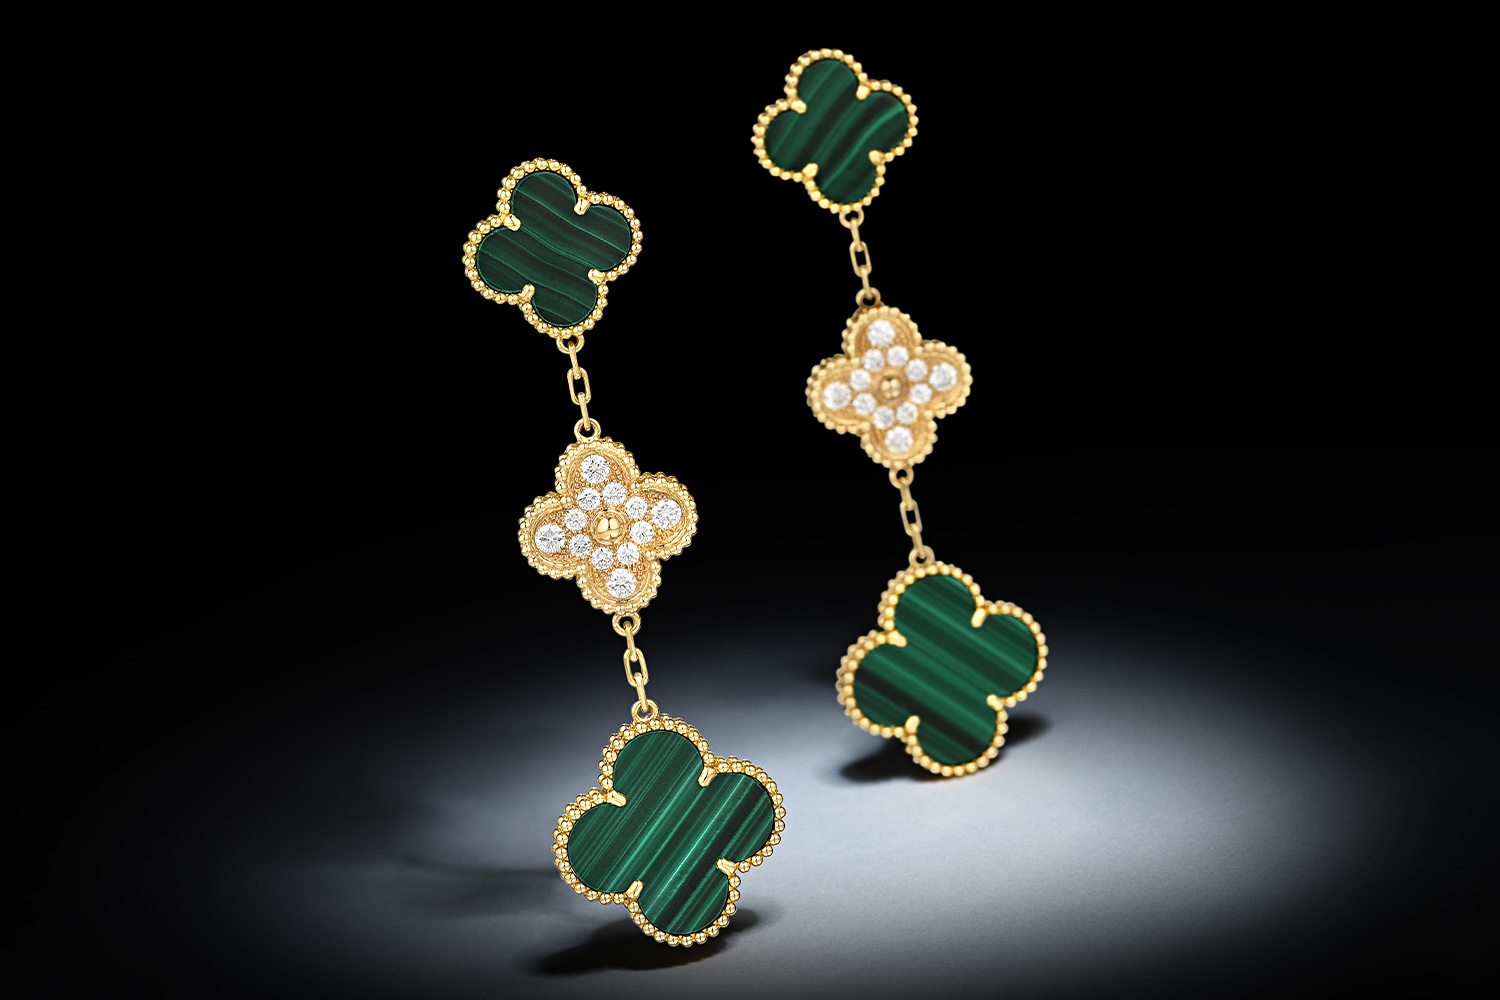 Van Cleef & Arpels Magic Alhambra Malachite and Diamond Earrings - Fortuna Fine Jewelry Auction NYC